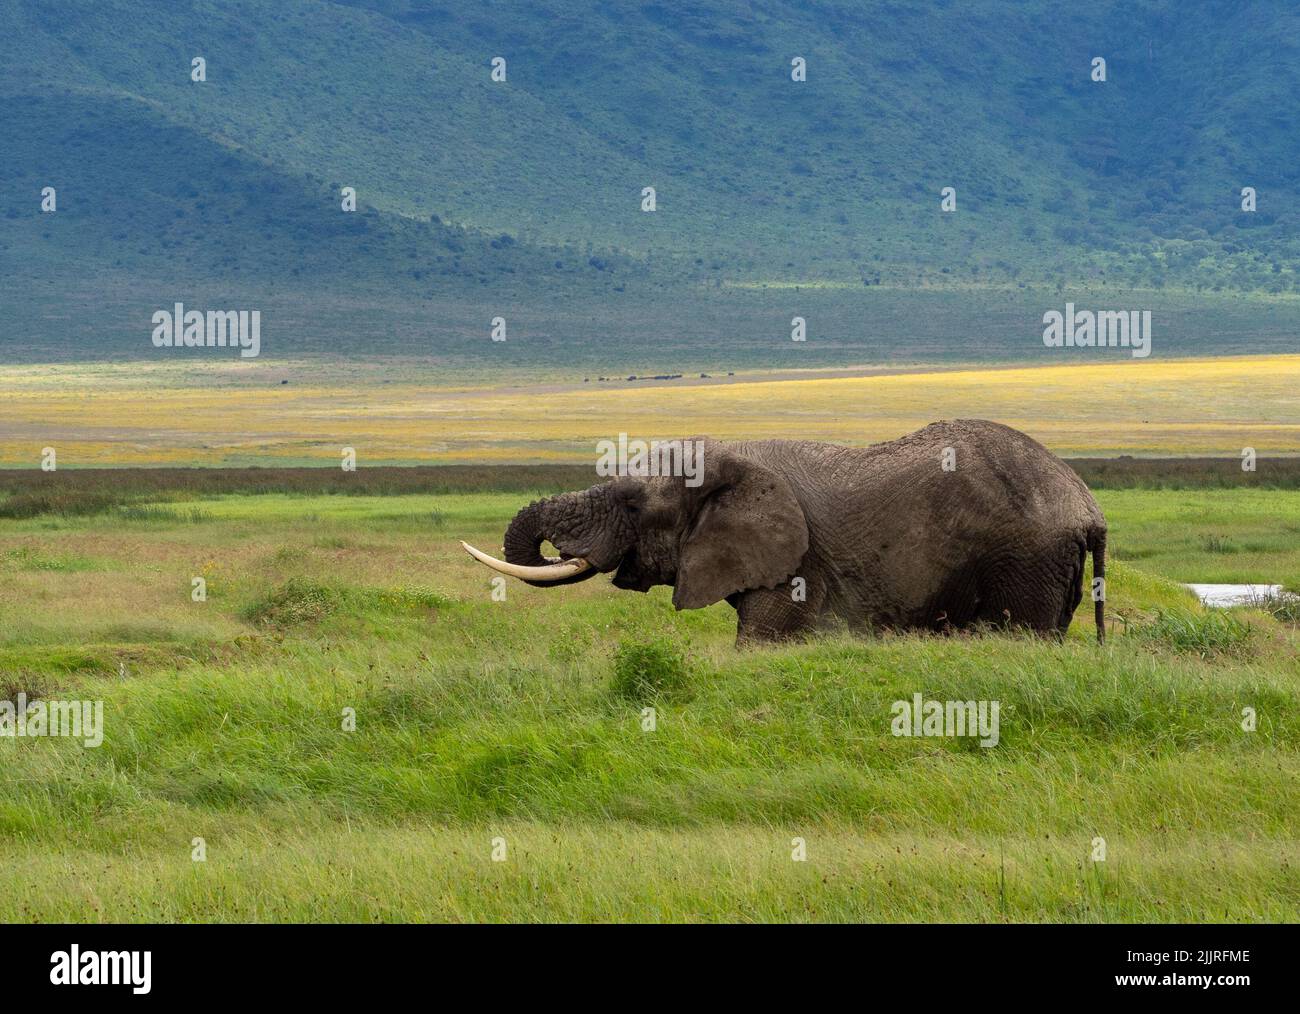 An adult African elephant drinking water on a green meadow in Serengeti National Park, Tanzania Stock Photo